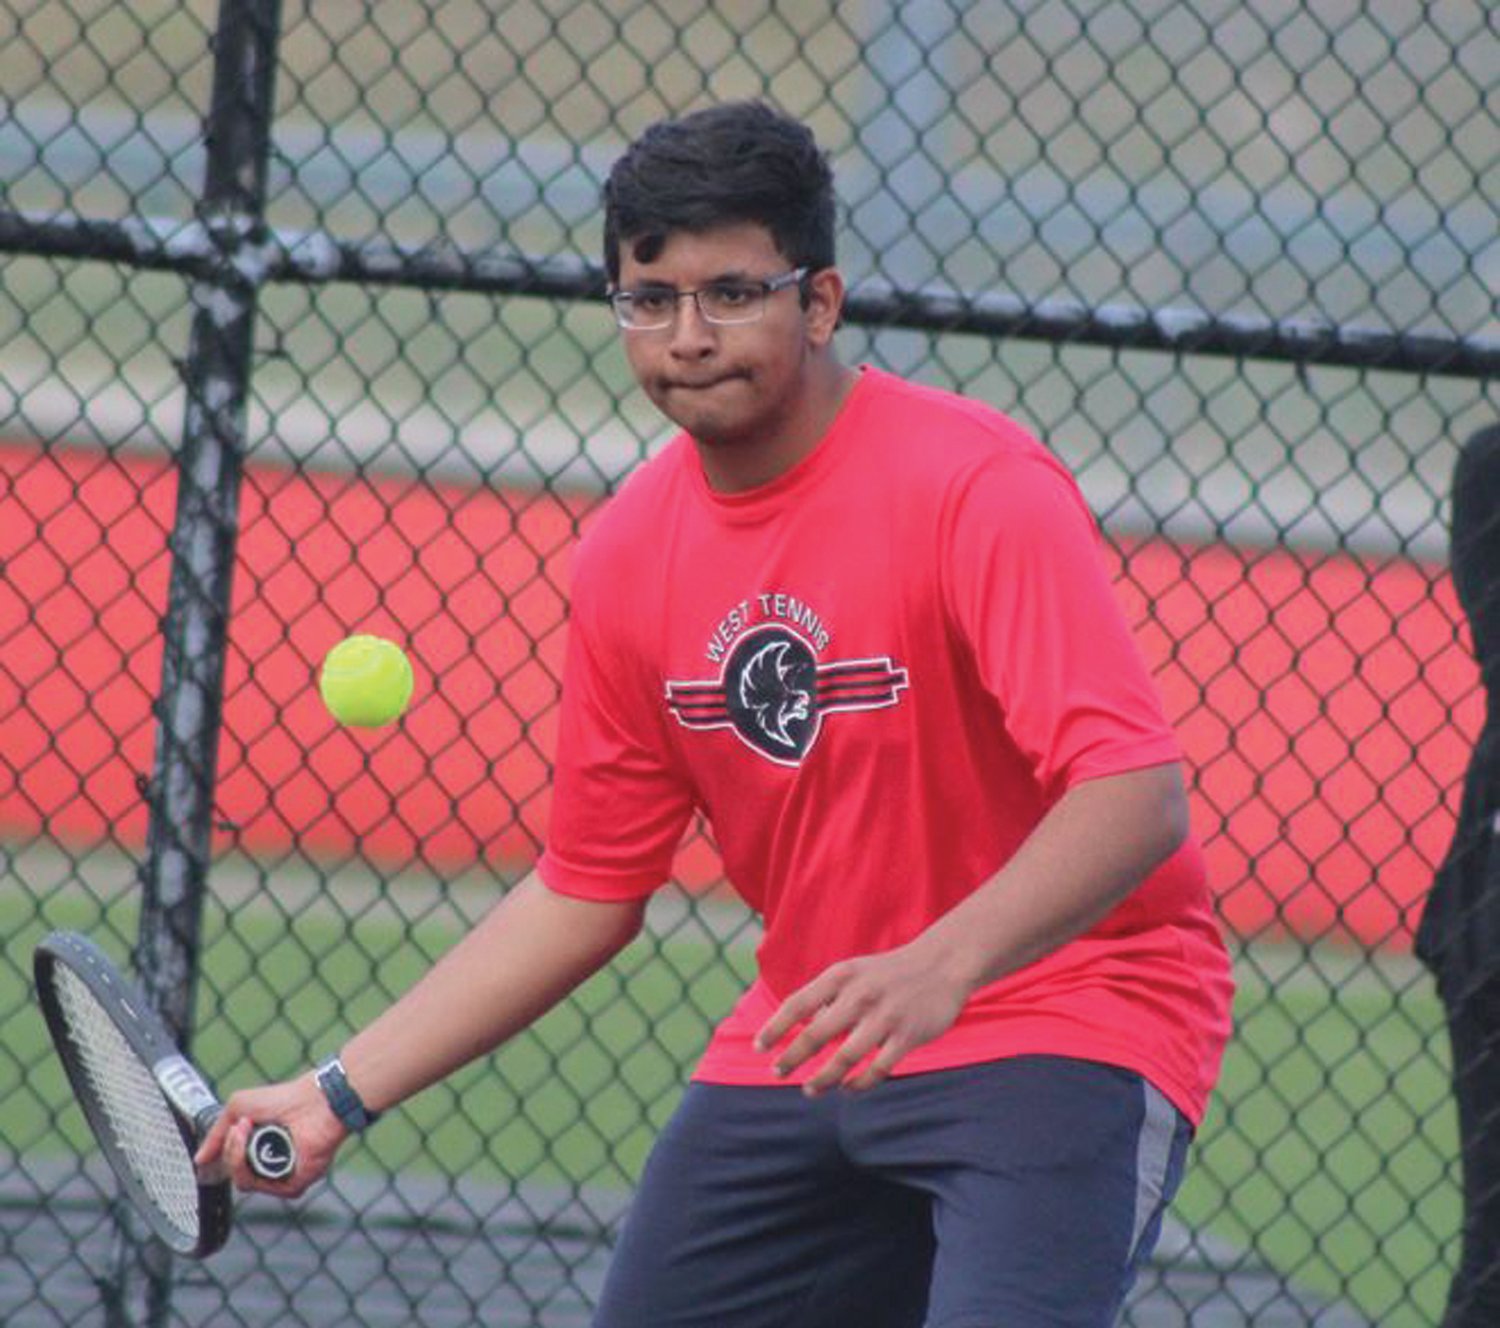 EYE ON THE PRIZE: Cranston West’s Aditya Godbole returns a shot against Cumberland last week in a match at home. The visiting Clippers took home a 5-2 win to hand the Falcons their first loss of the season. The 3-1 Falcons are off to a solid start and are looking to make some noise in Division II this spring. (Photos by Alex Sponseller)